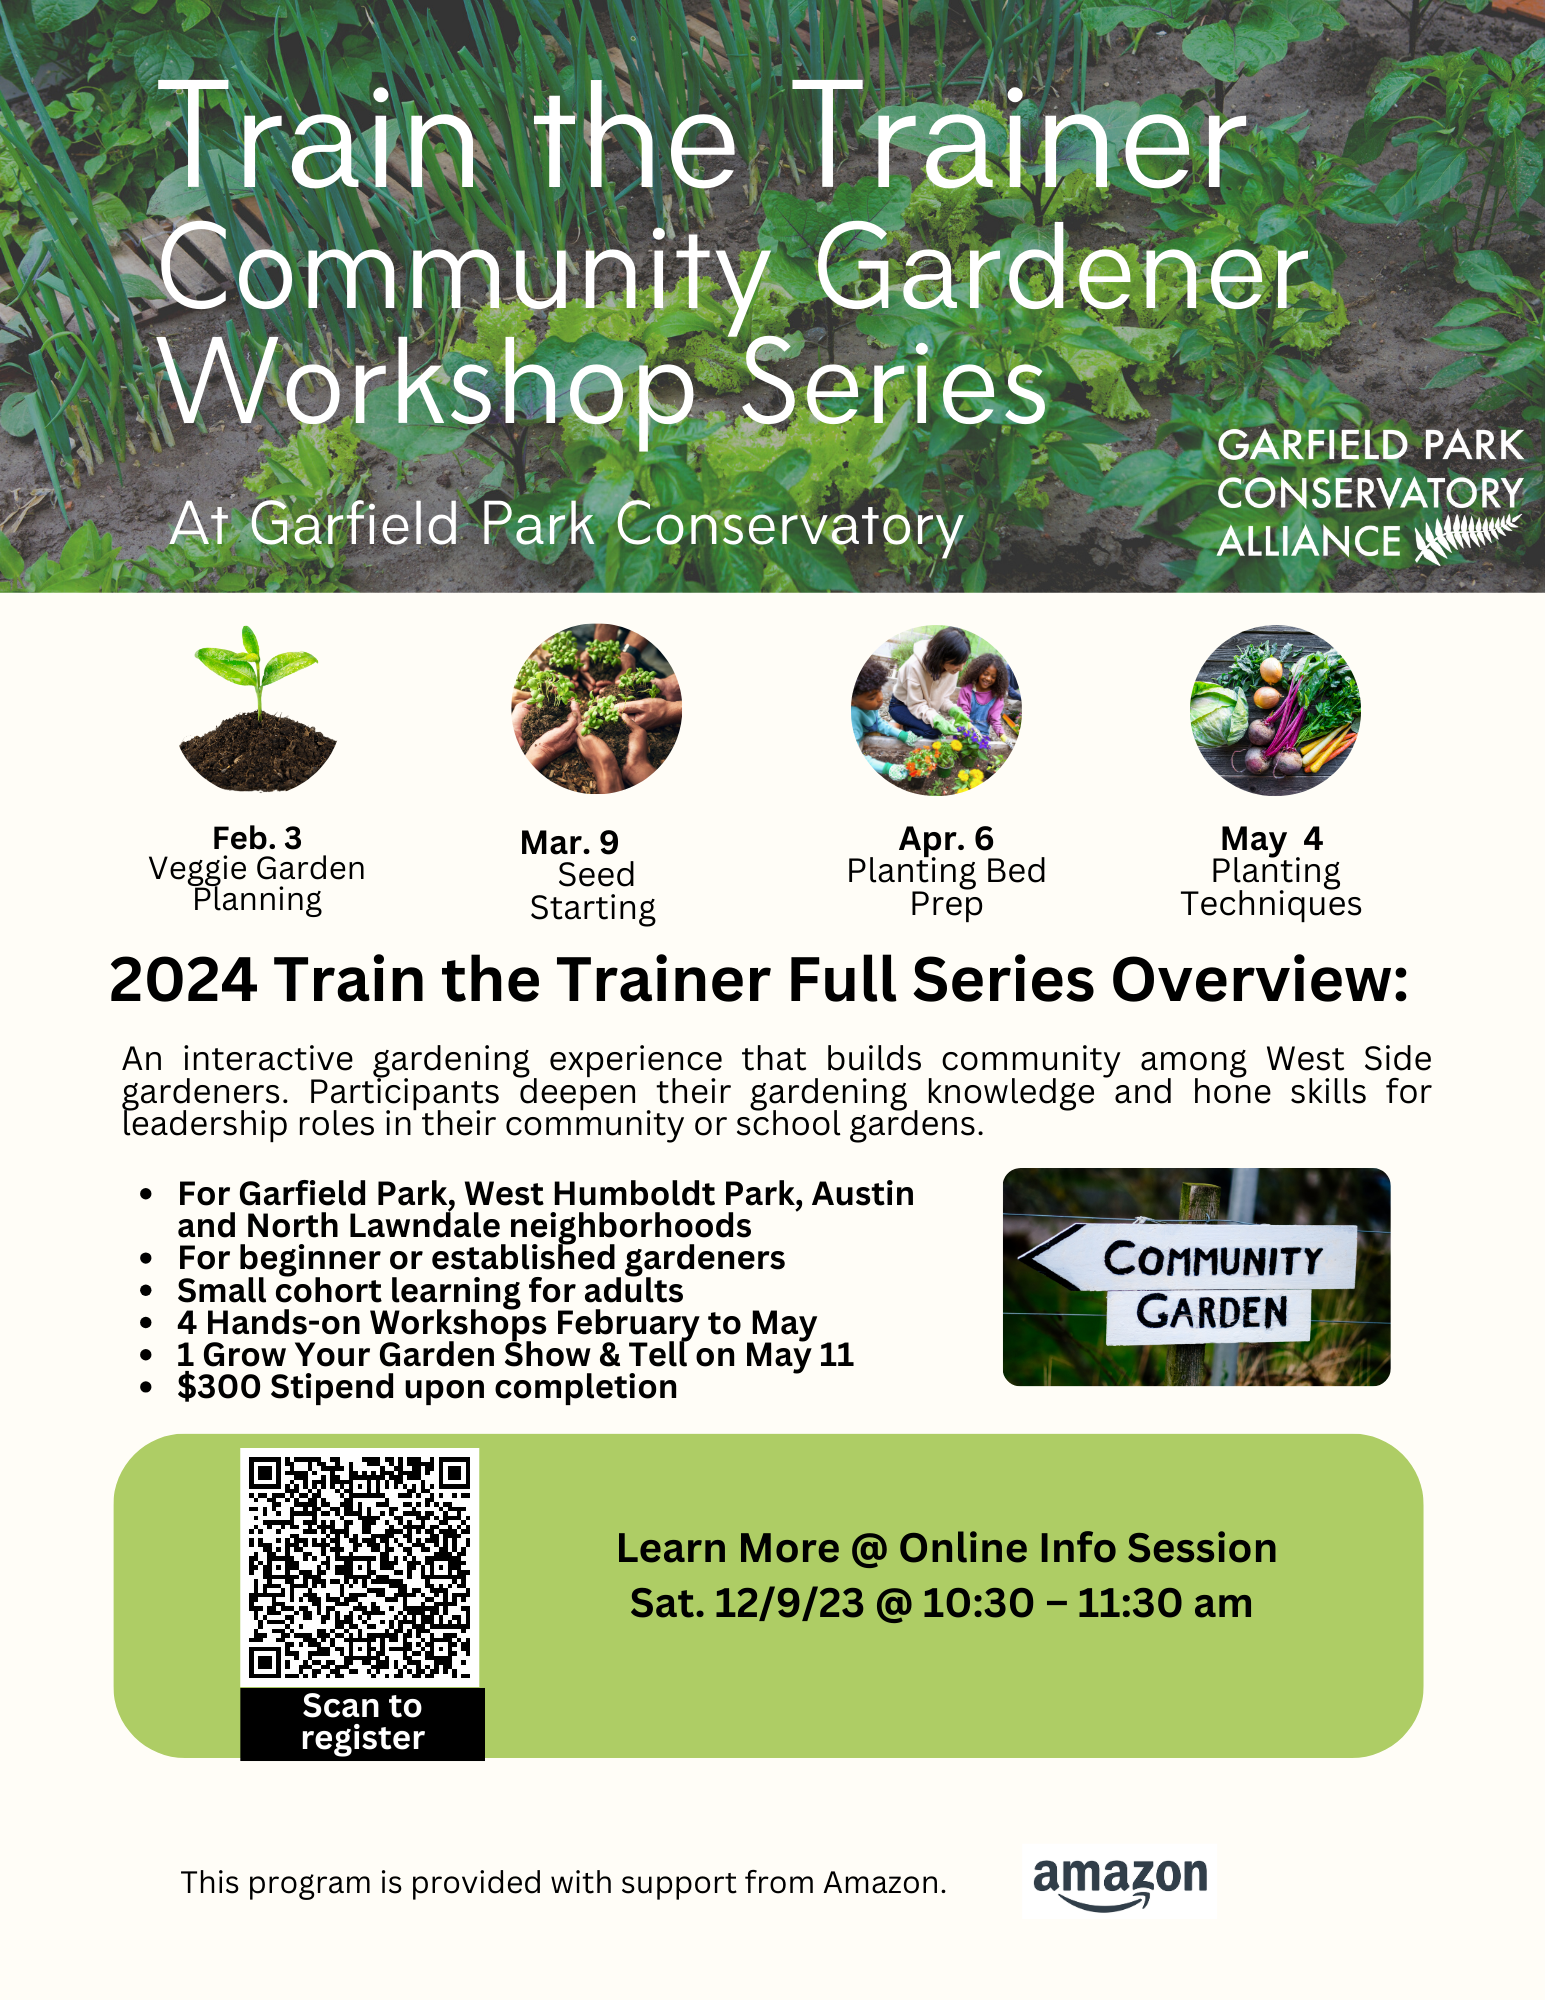 GPCA’s 2024 Train the Trainer Workshop Series for West Side Community & School Gardeners.